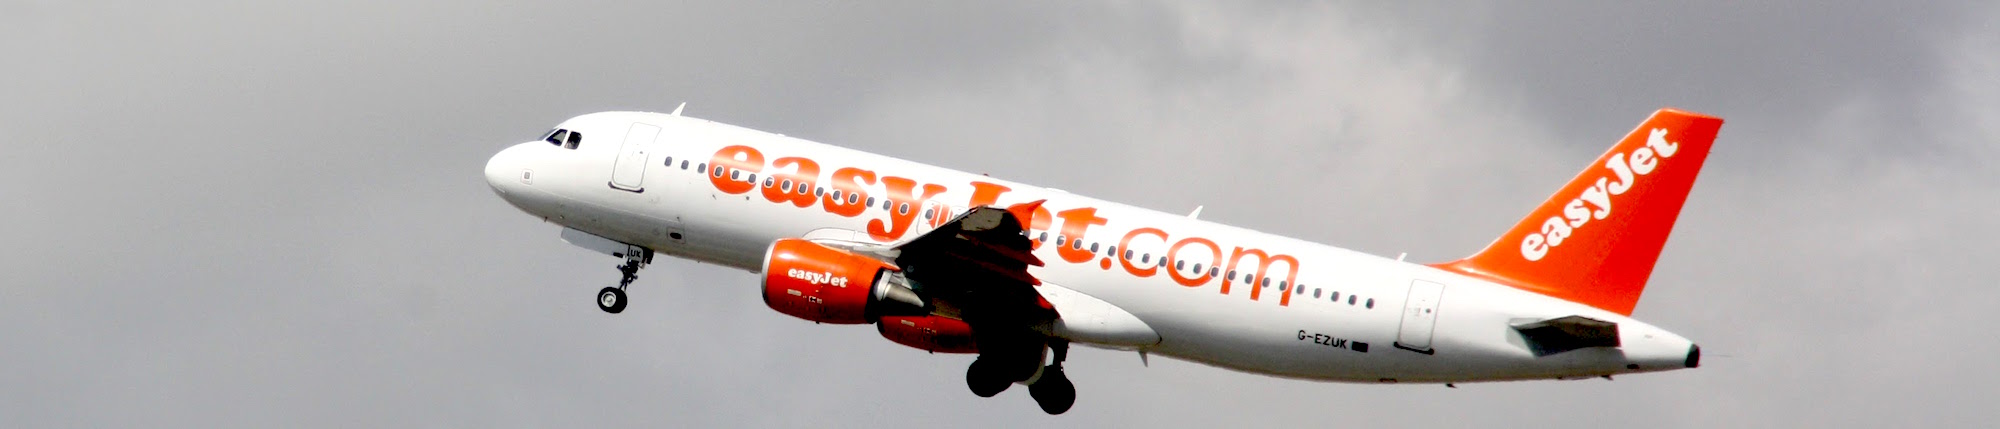 Best time to book flights for Barcelona (BCN) to Manchester (MAN) flights with EasyJet at AirHint